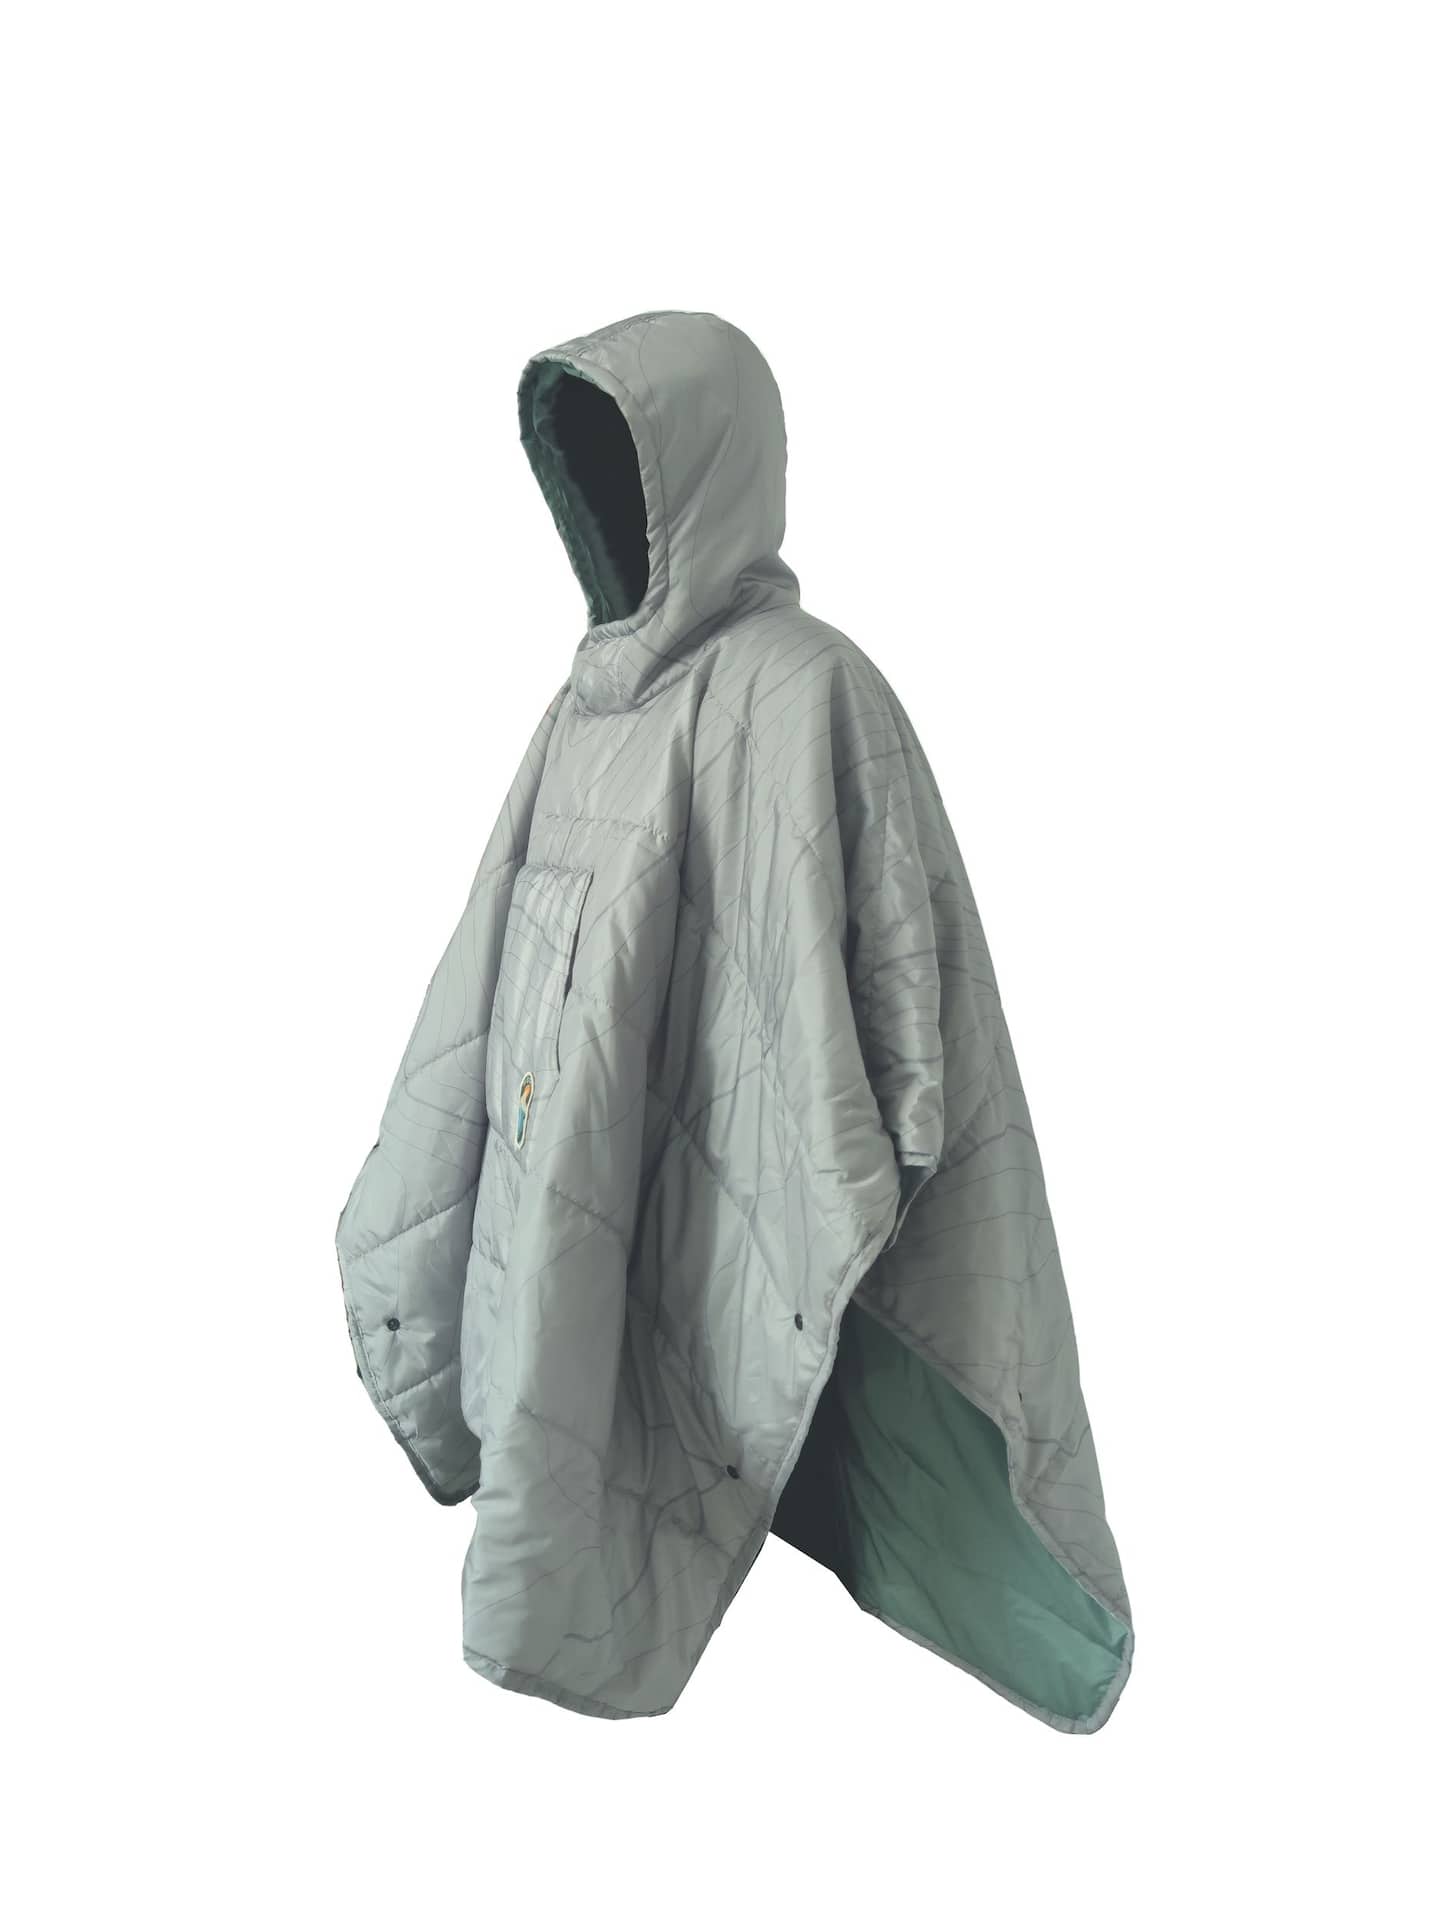 Woods Insulated Reversible Camping Poncho, One-Size